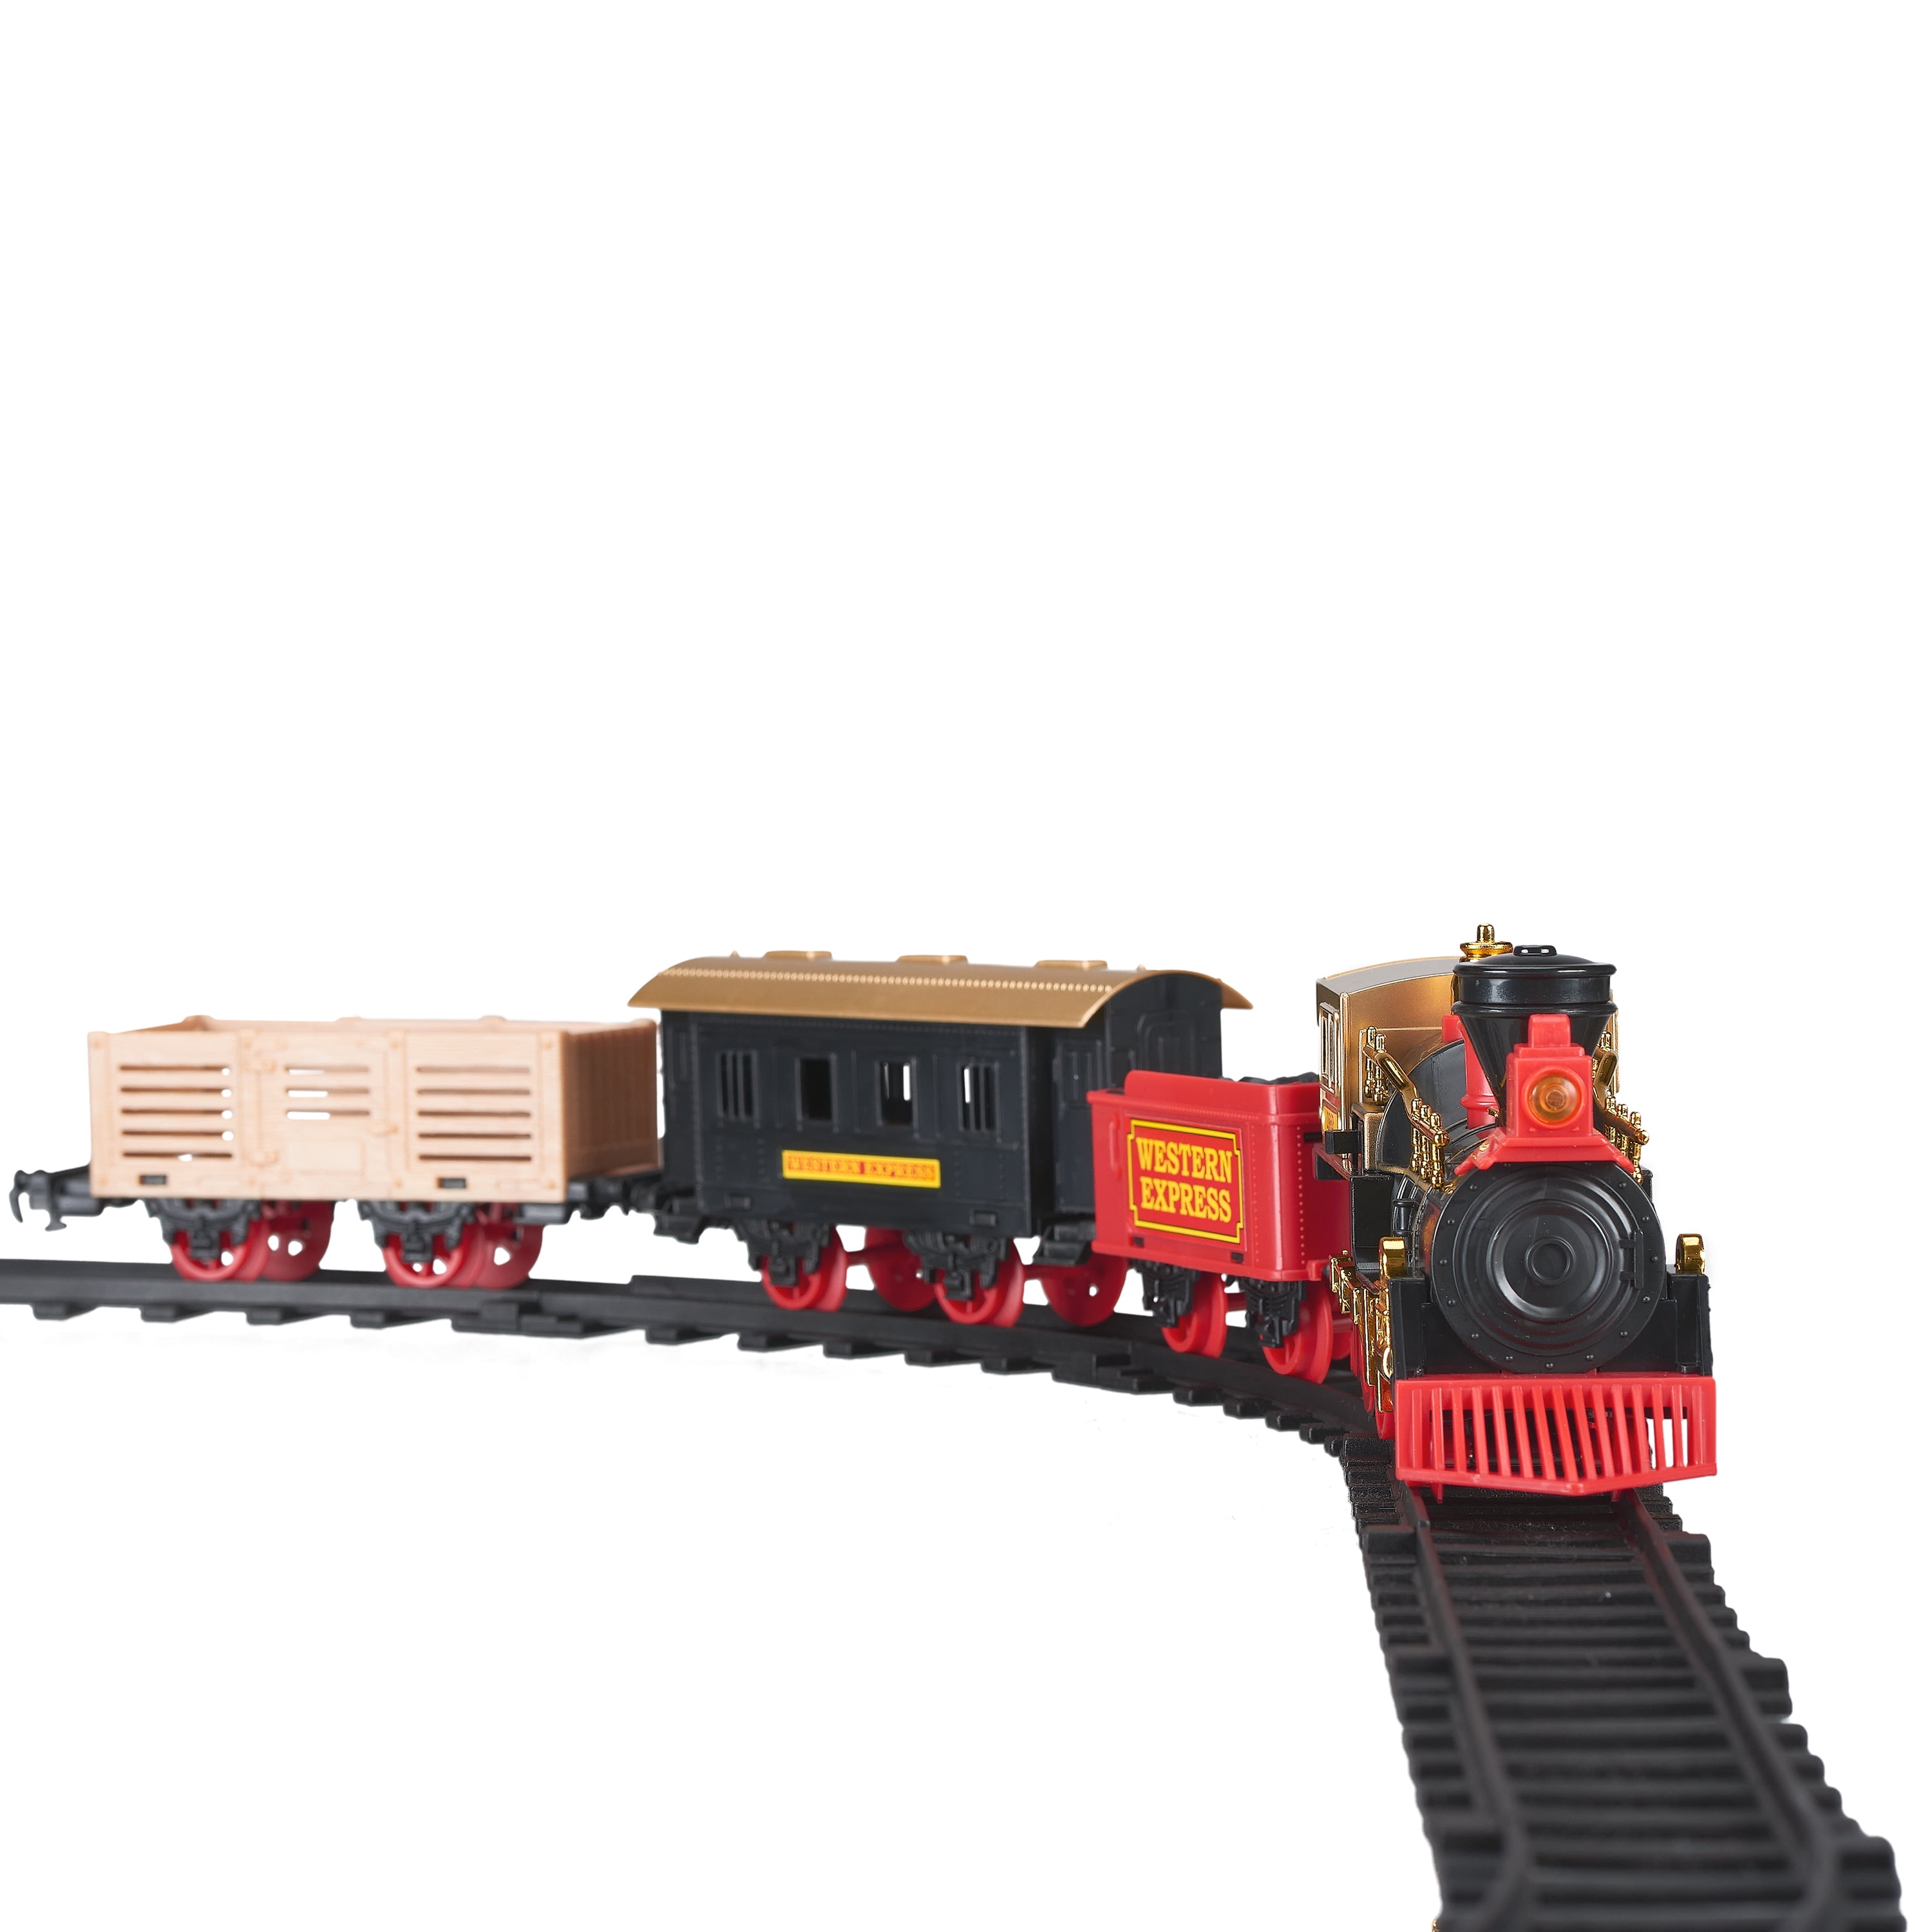 Kid Connection Railroad Engine and Tracks 22 PC Battery Operated B106 for sale online 